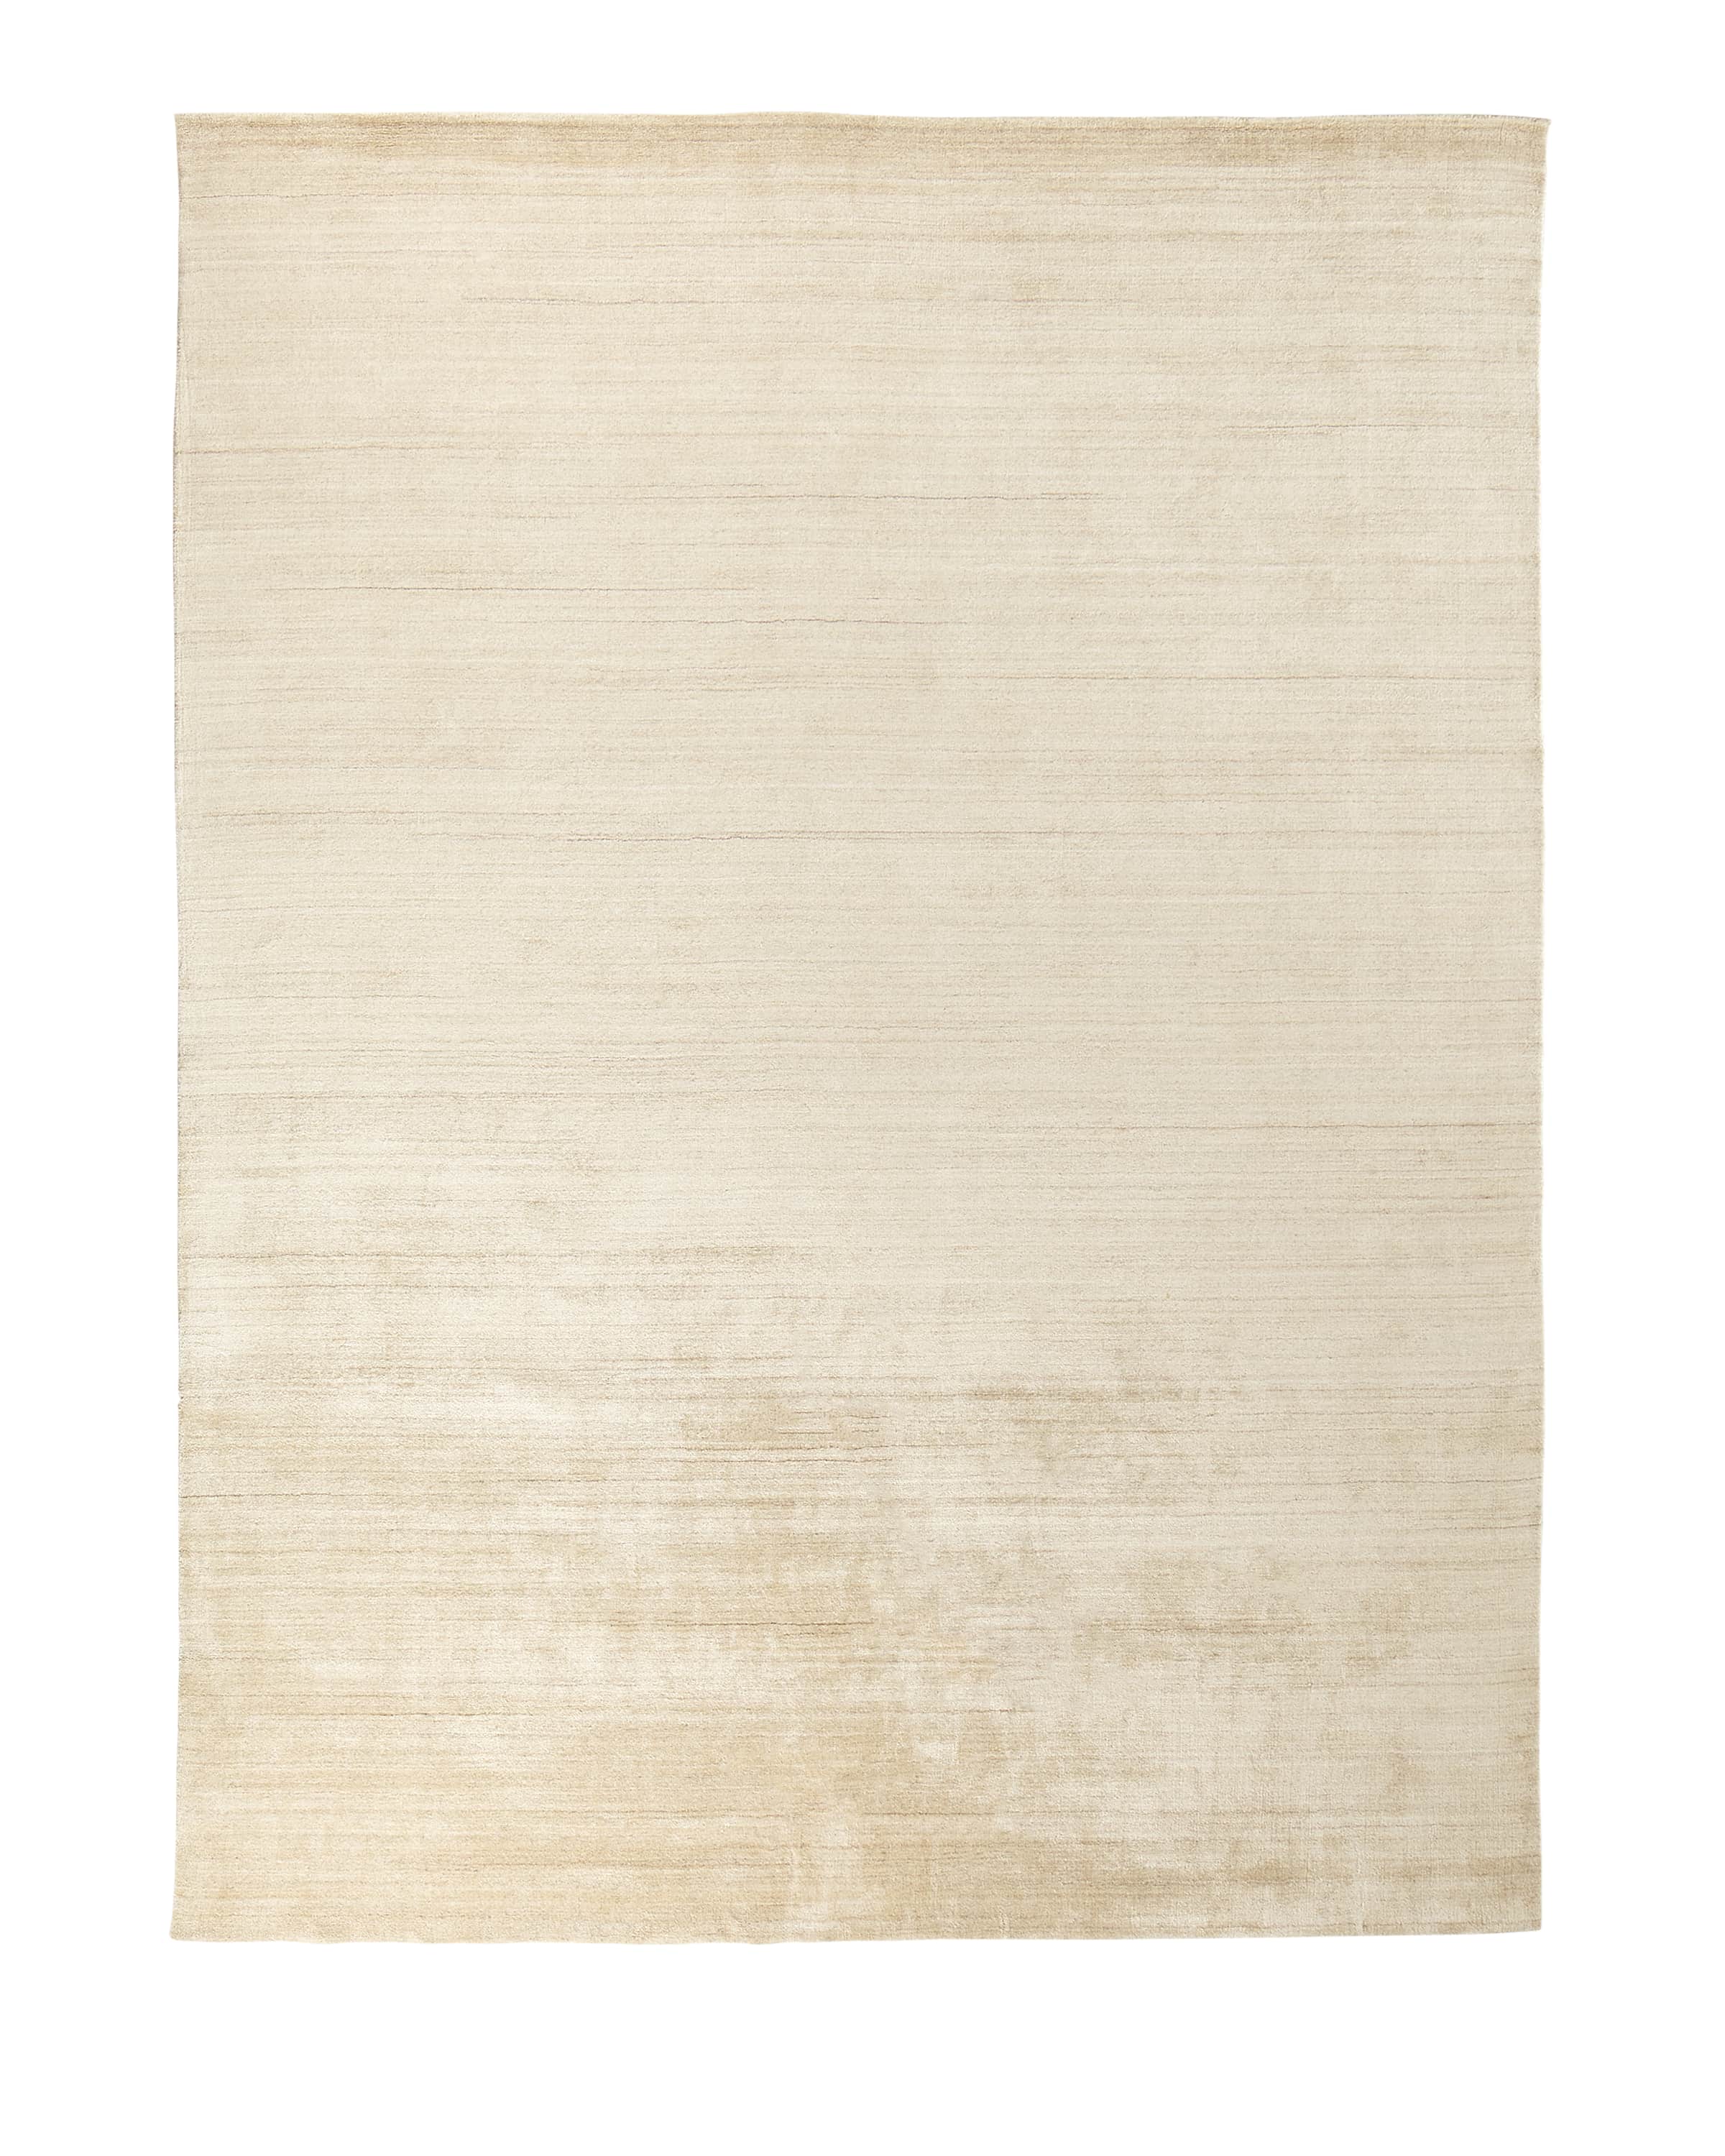 Exquisite Rugs Thames Rug, 10' x 14'